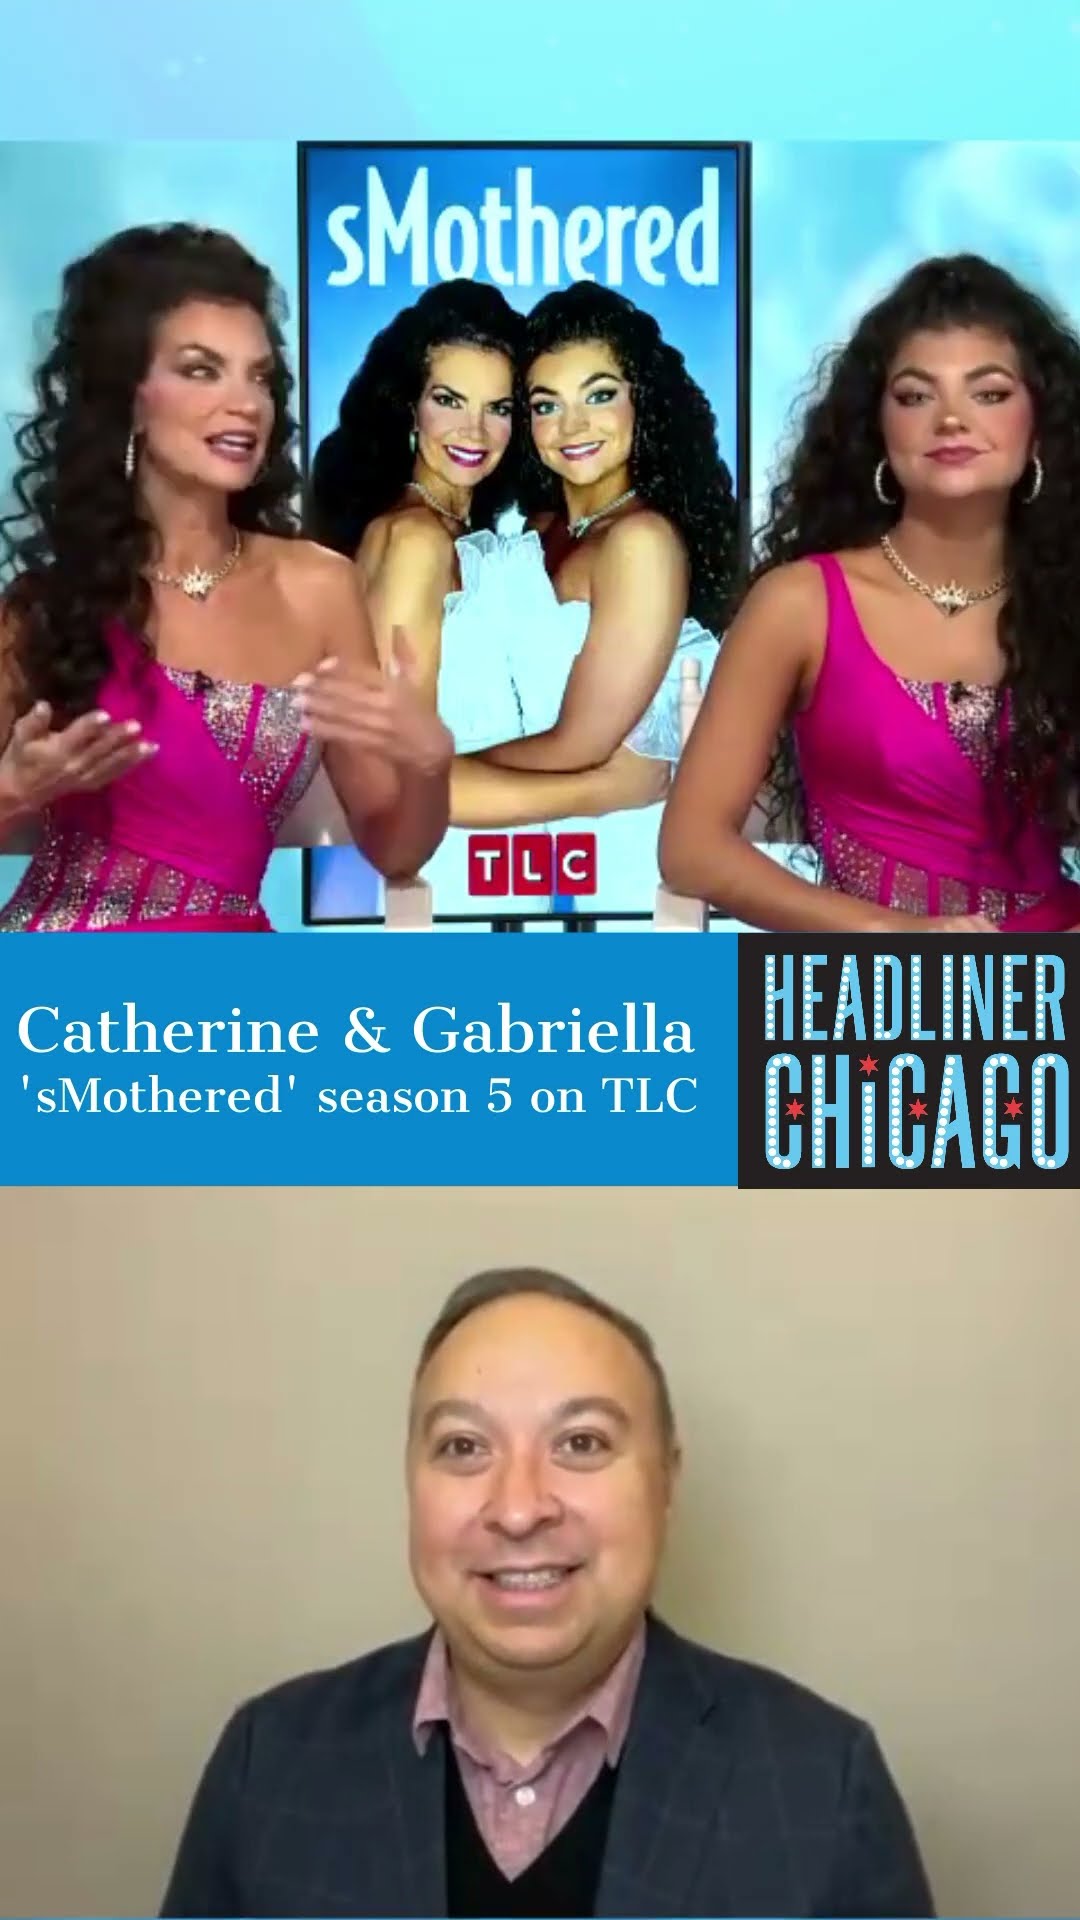 Catherine & Gabriella join season 5 of sMothered on TLC, Miss Connecticut  USA pageant & unique bond 